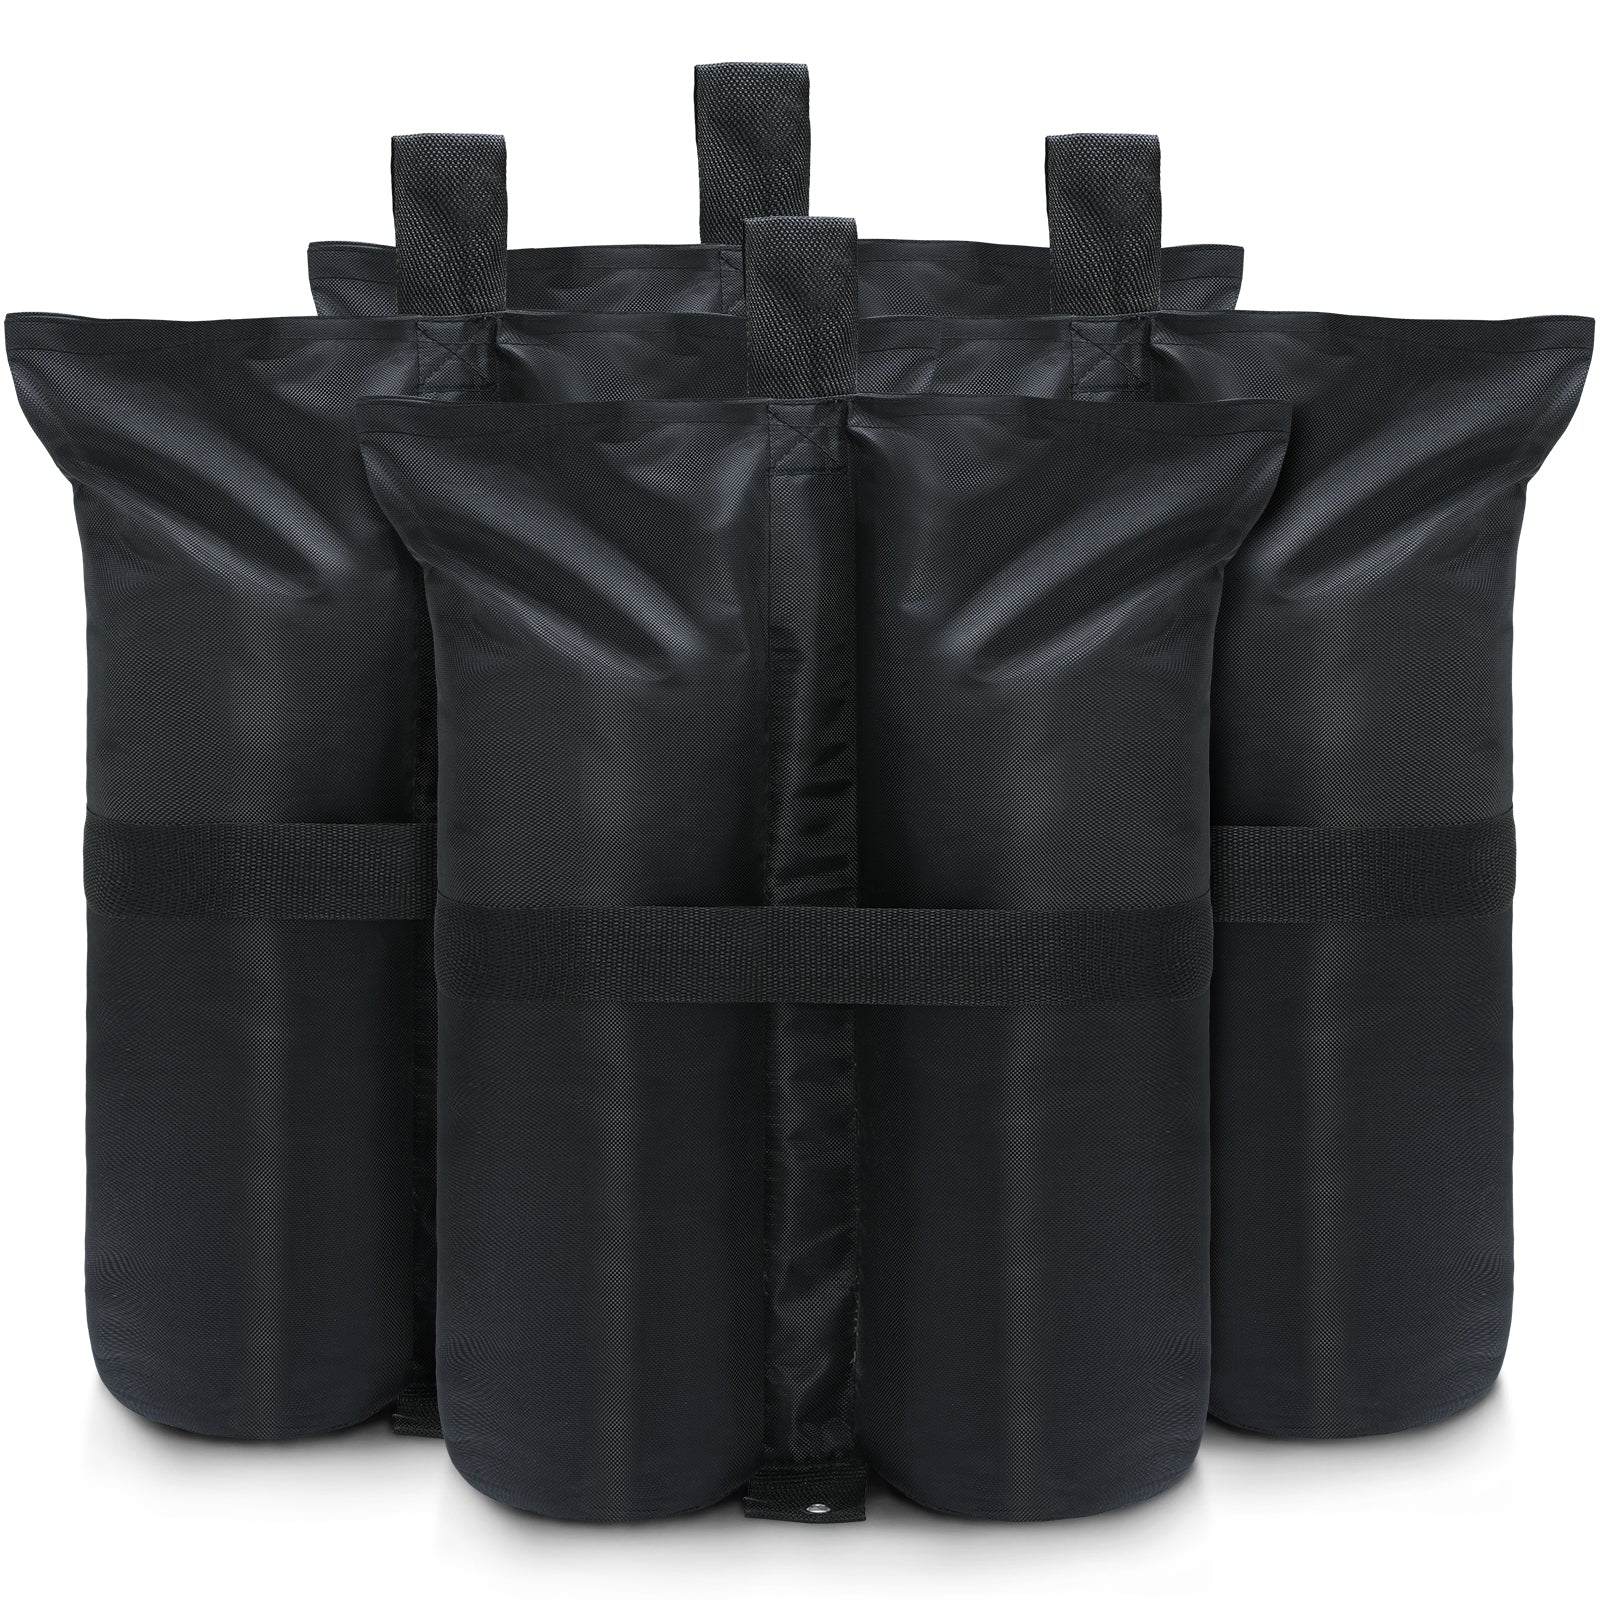 ABCCANOPY Heavy Duty Weight Bags (Set of 4 Weight Bags) 50lb